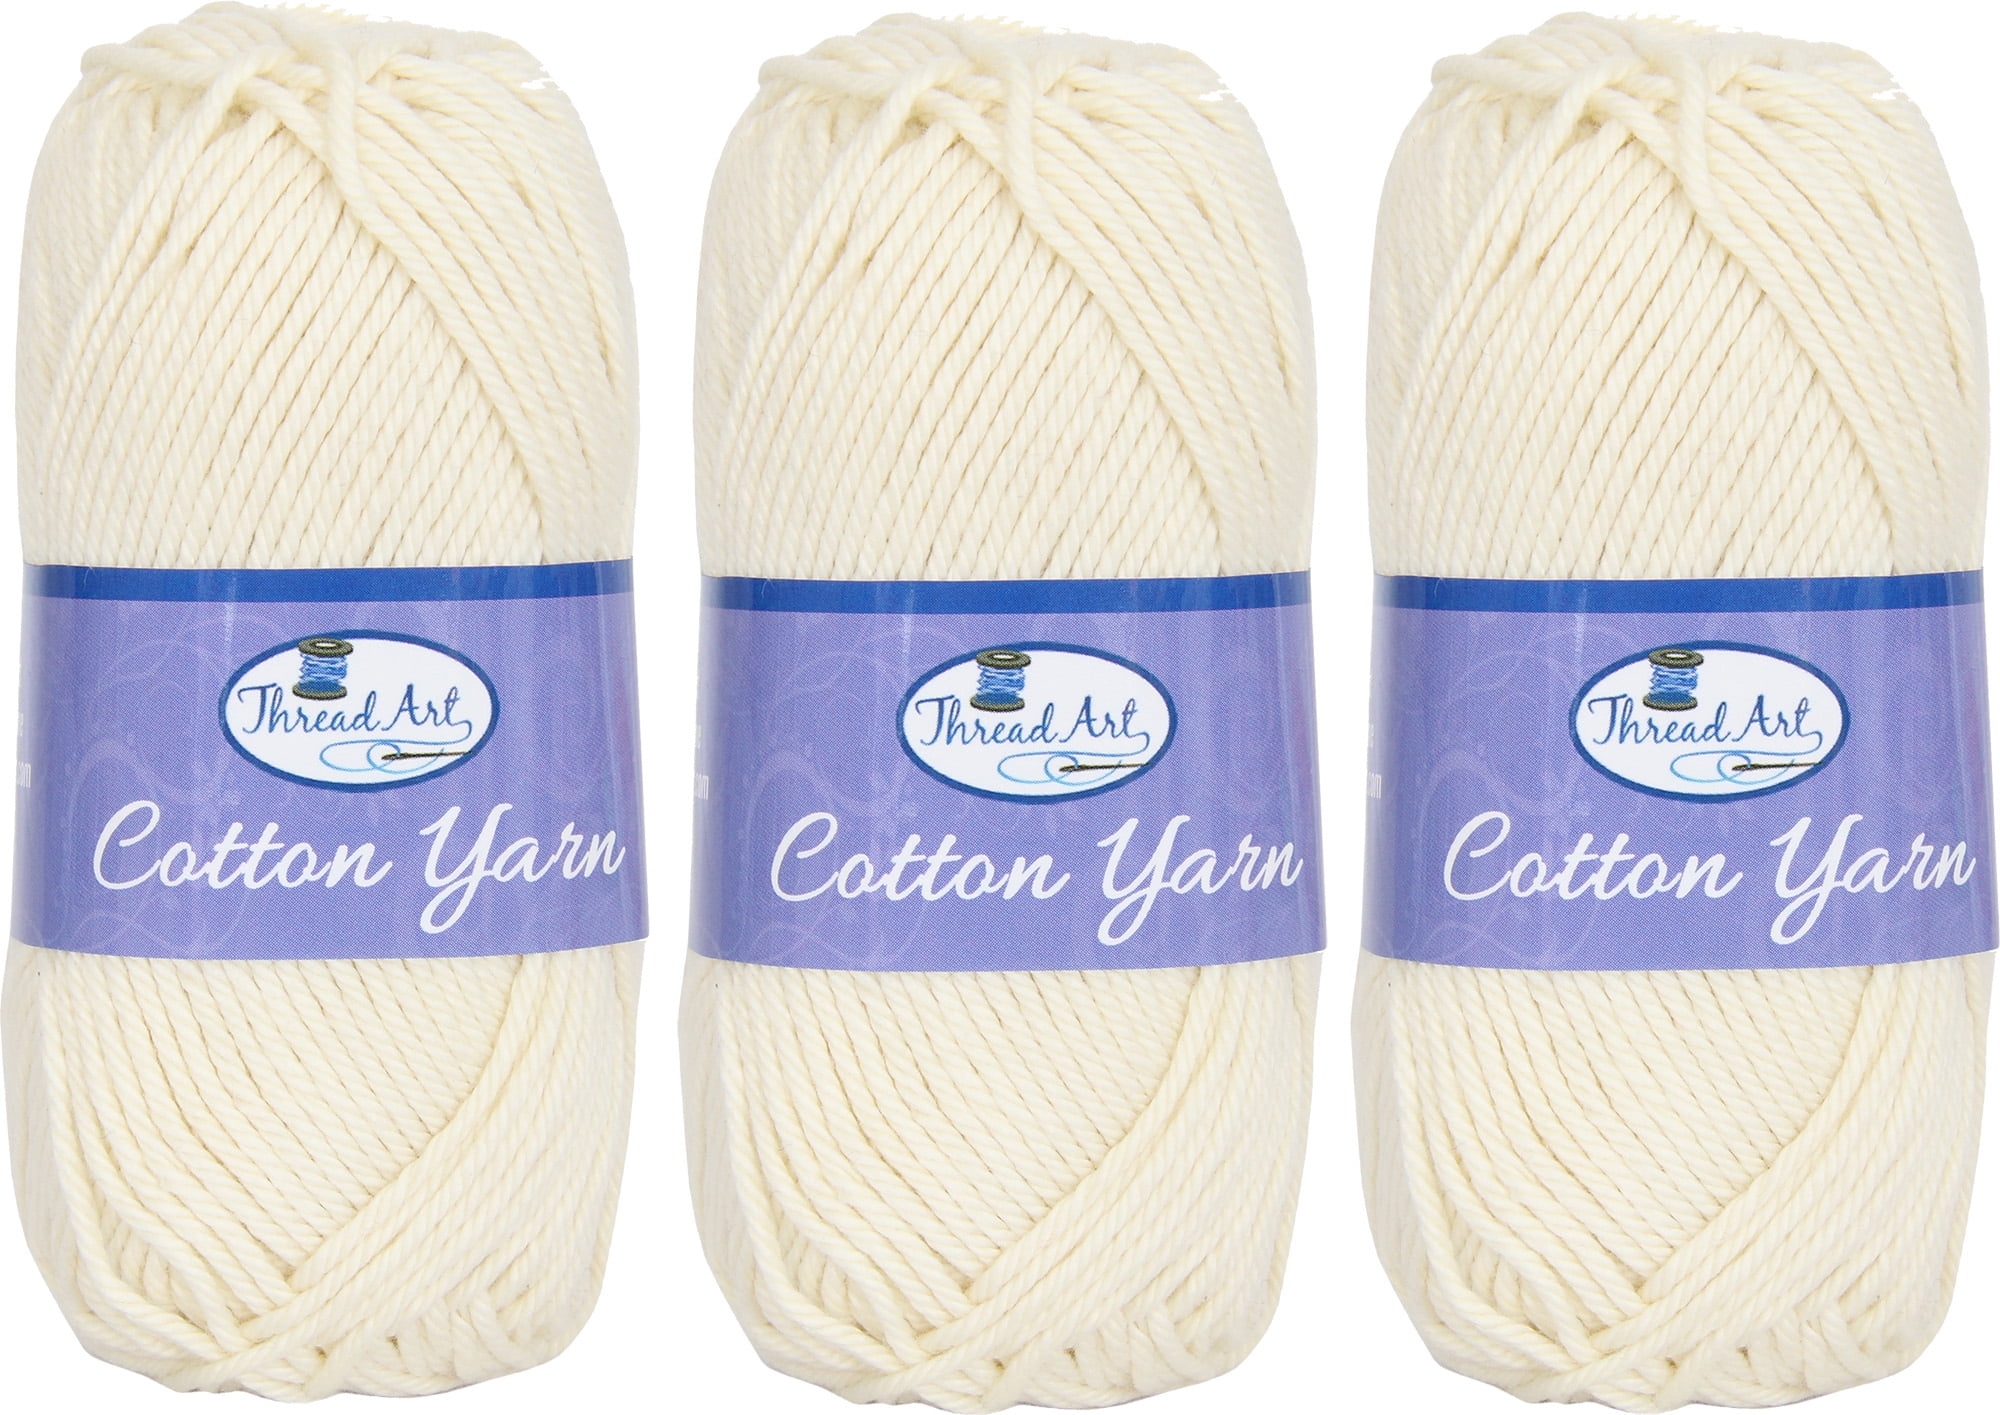 3 Pack of 100% Pure Cotton Crochet Yarn by Threadart | Natural | 50 gram  Skeins | Worsted Medium #4 Yarn | 85 yds per Skein - 30 Colors Available